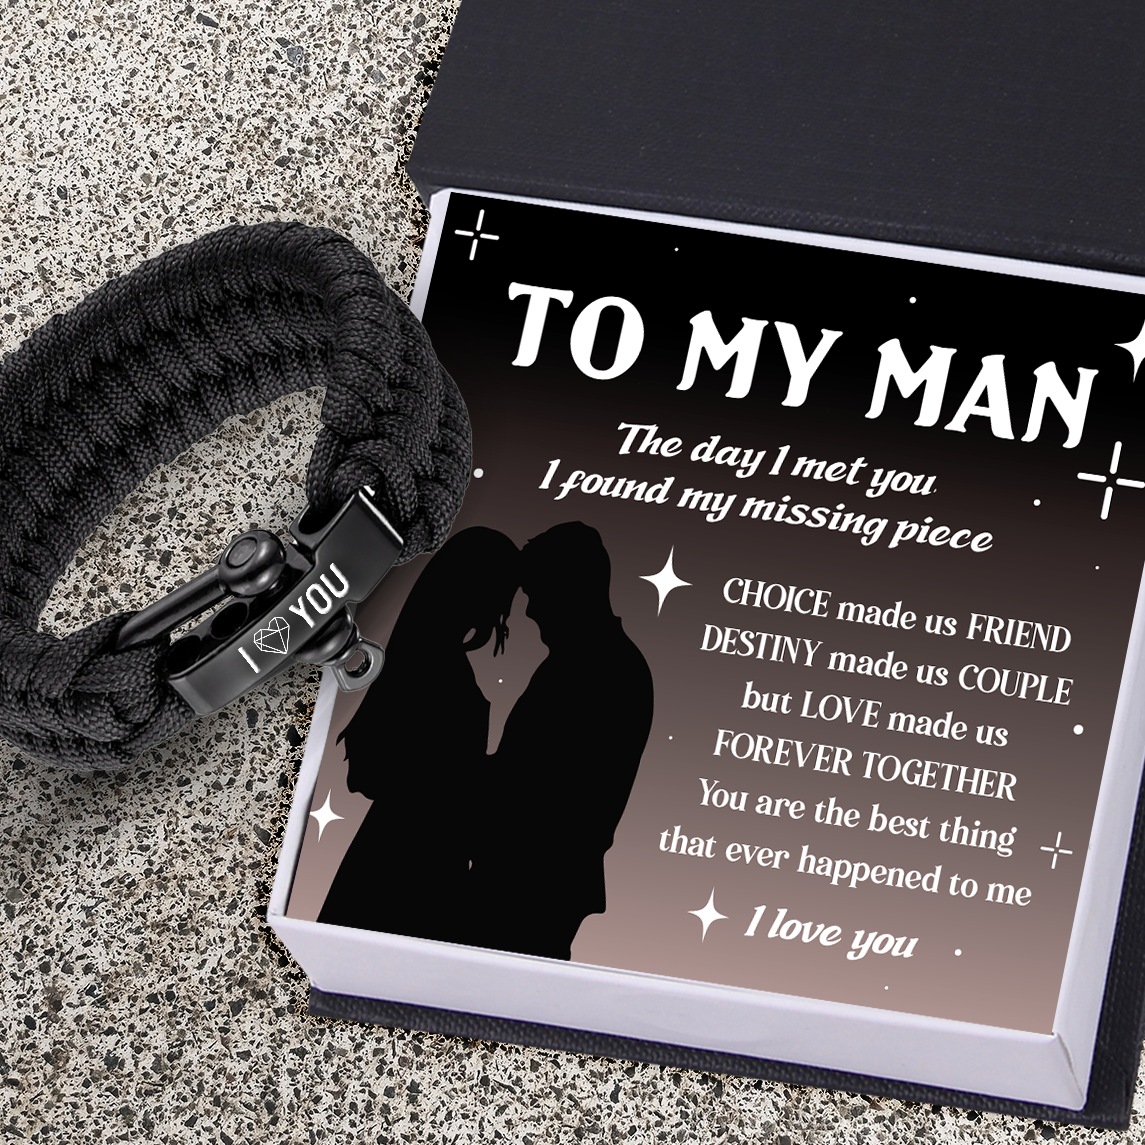 Paracord Rope Bracelet - Family - To My Man - Love Made Us Forever Together - Ukgbxa26003